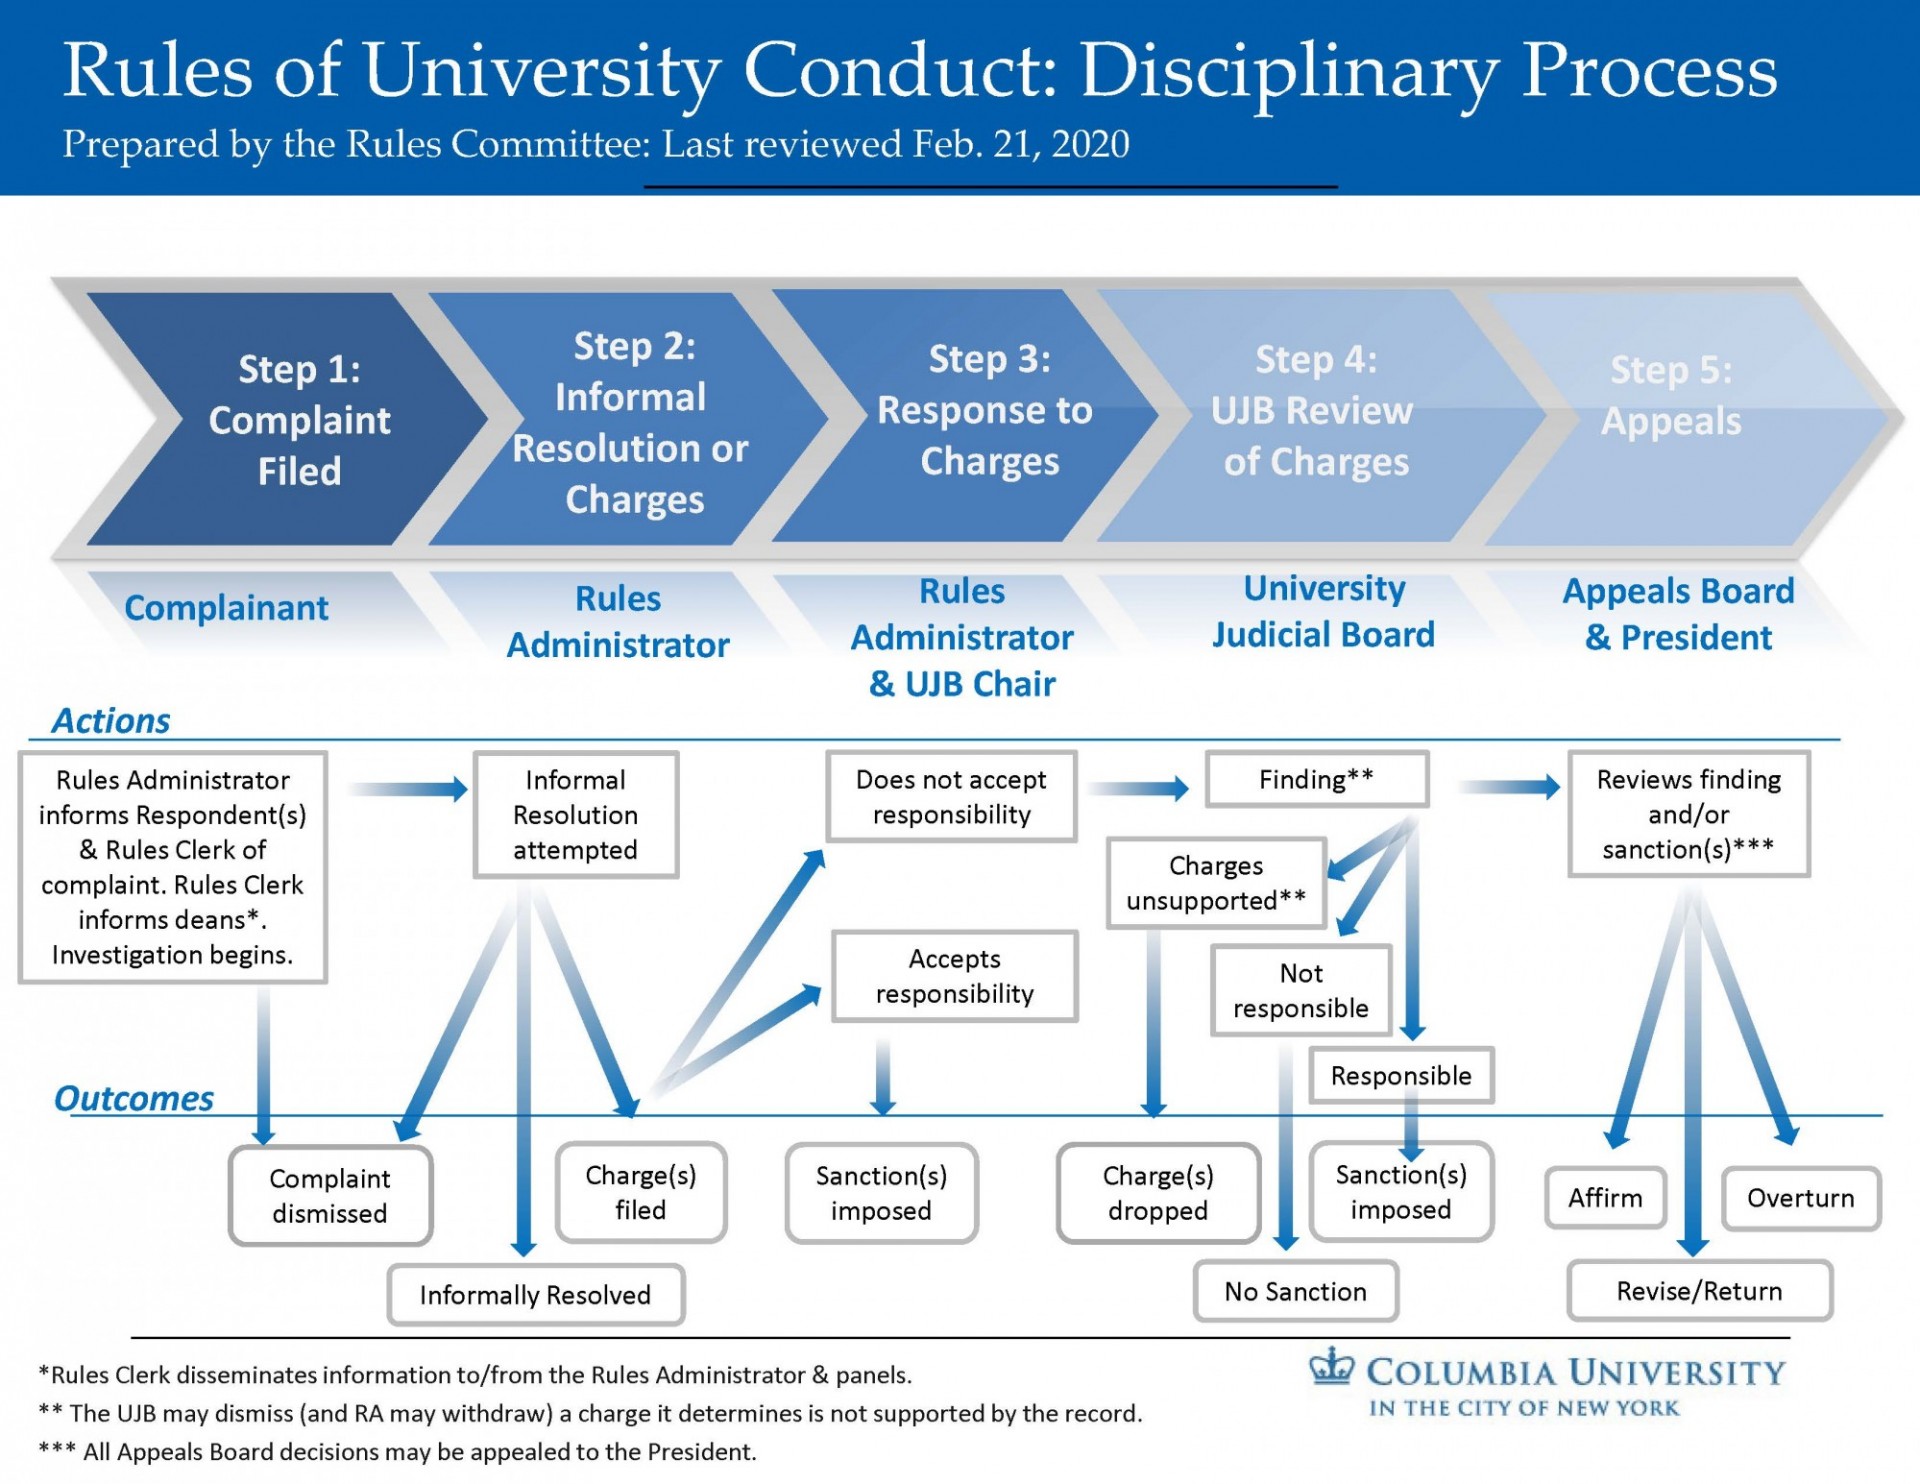 Rules of University Conduct, Disciplinary Process, and Guidelines